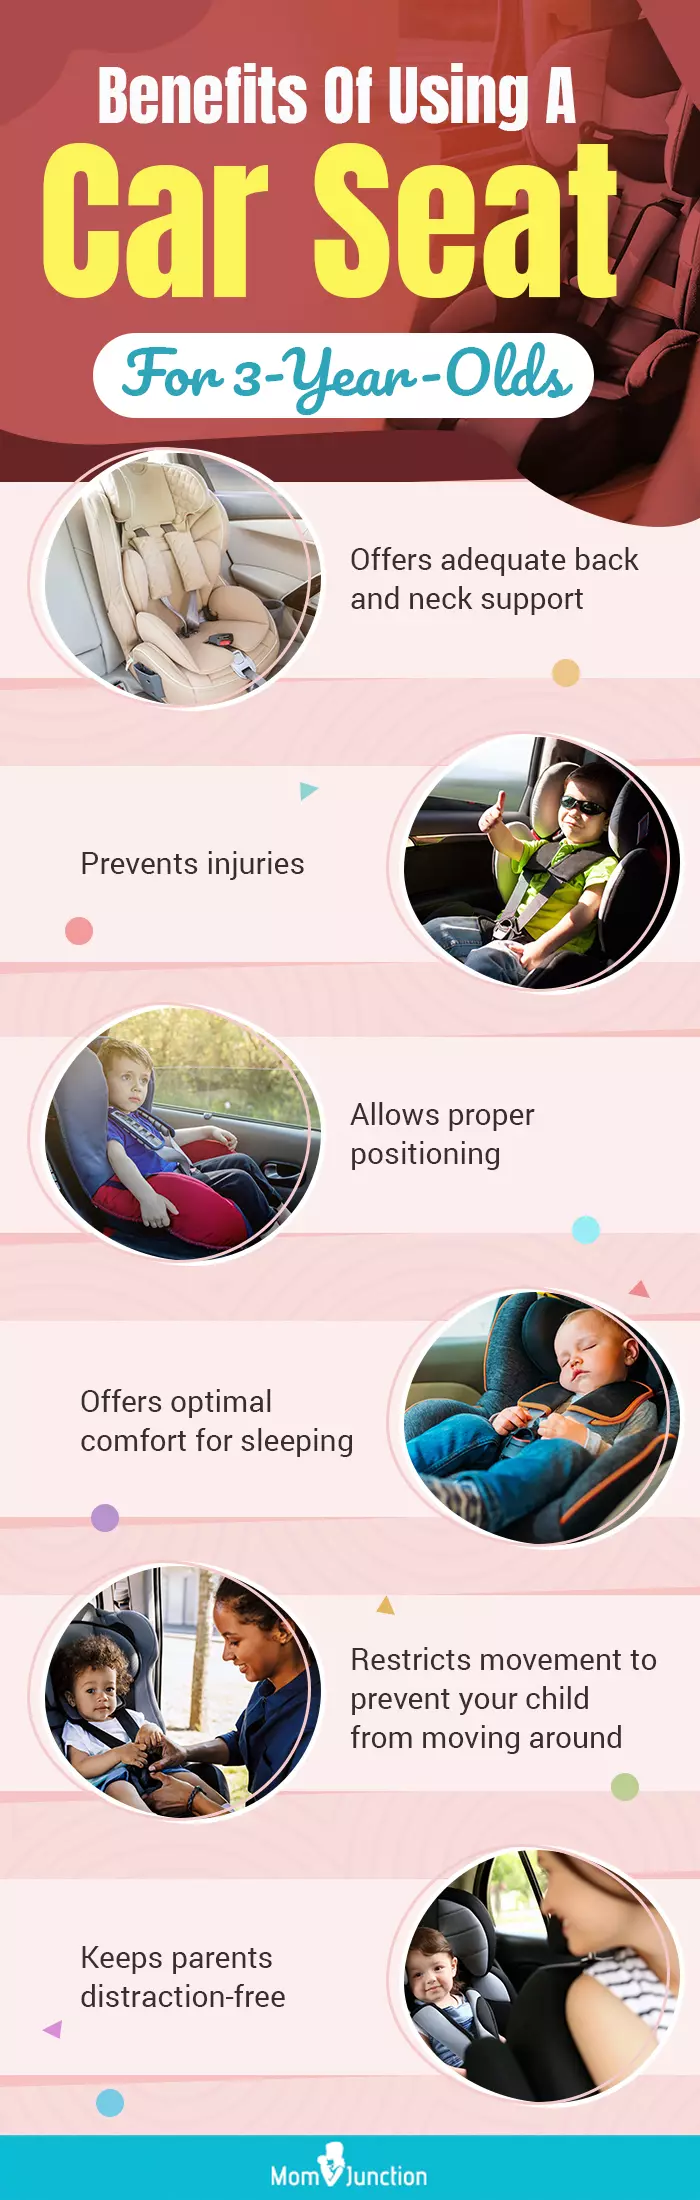 Benefits Of Using A Car Seat For 3 Year Olds (infographic)